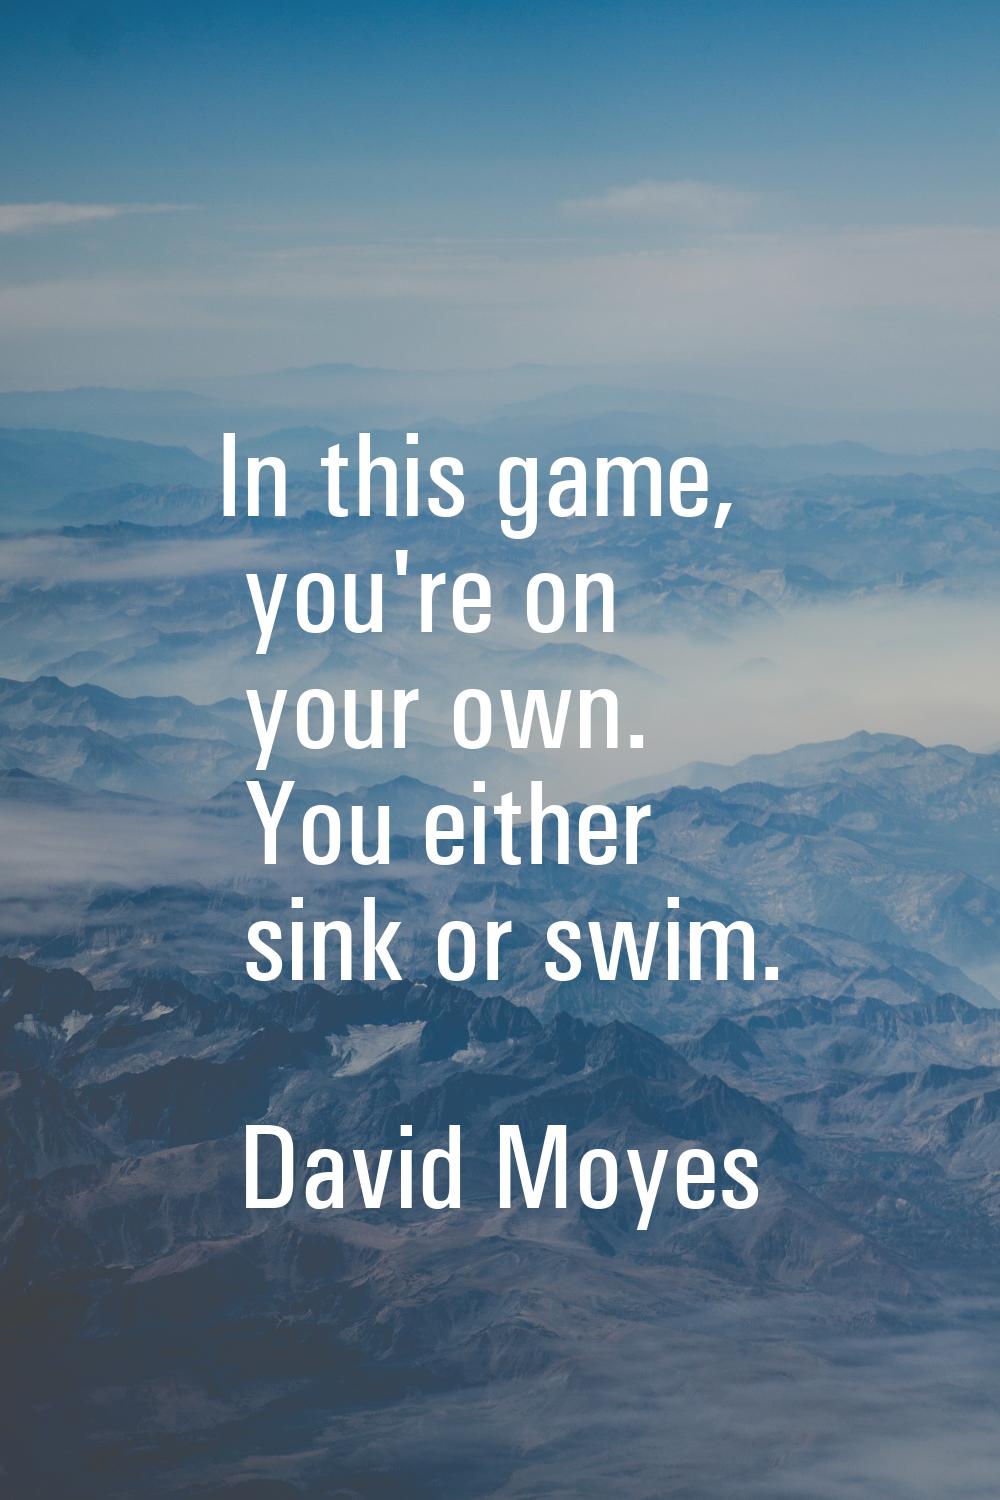 In this game, you're on your own. You either sink or swim.